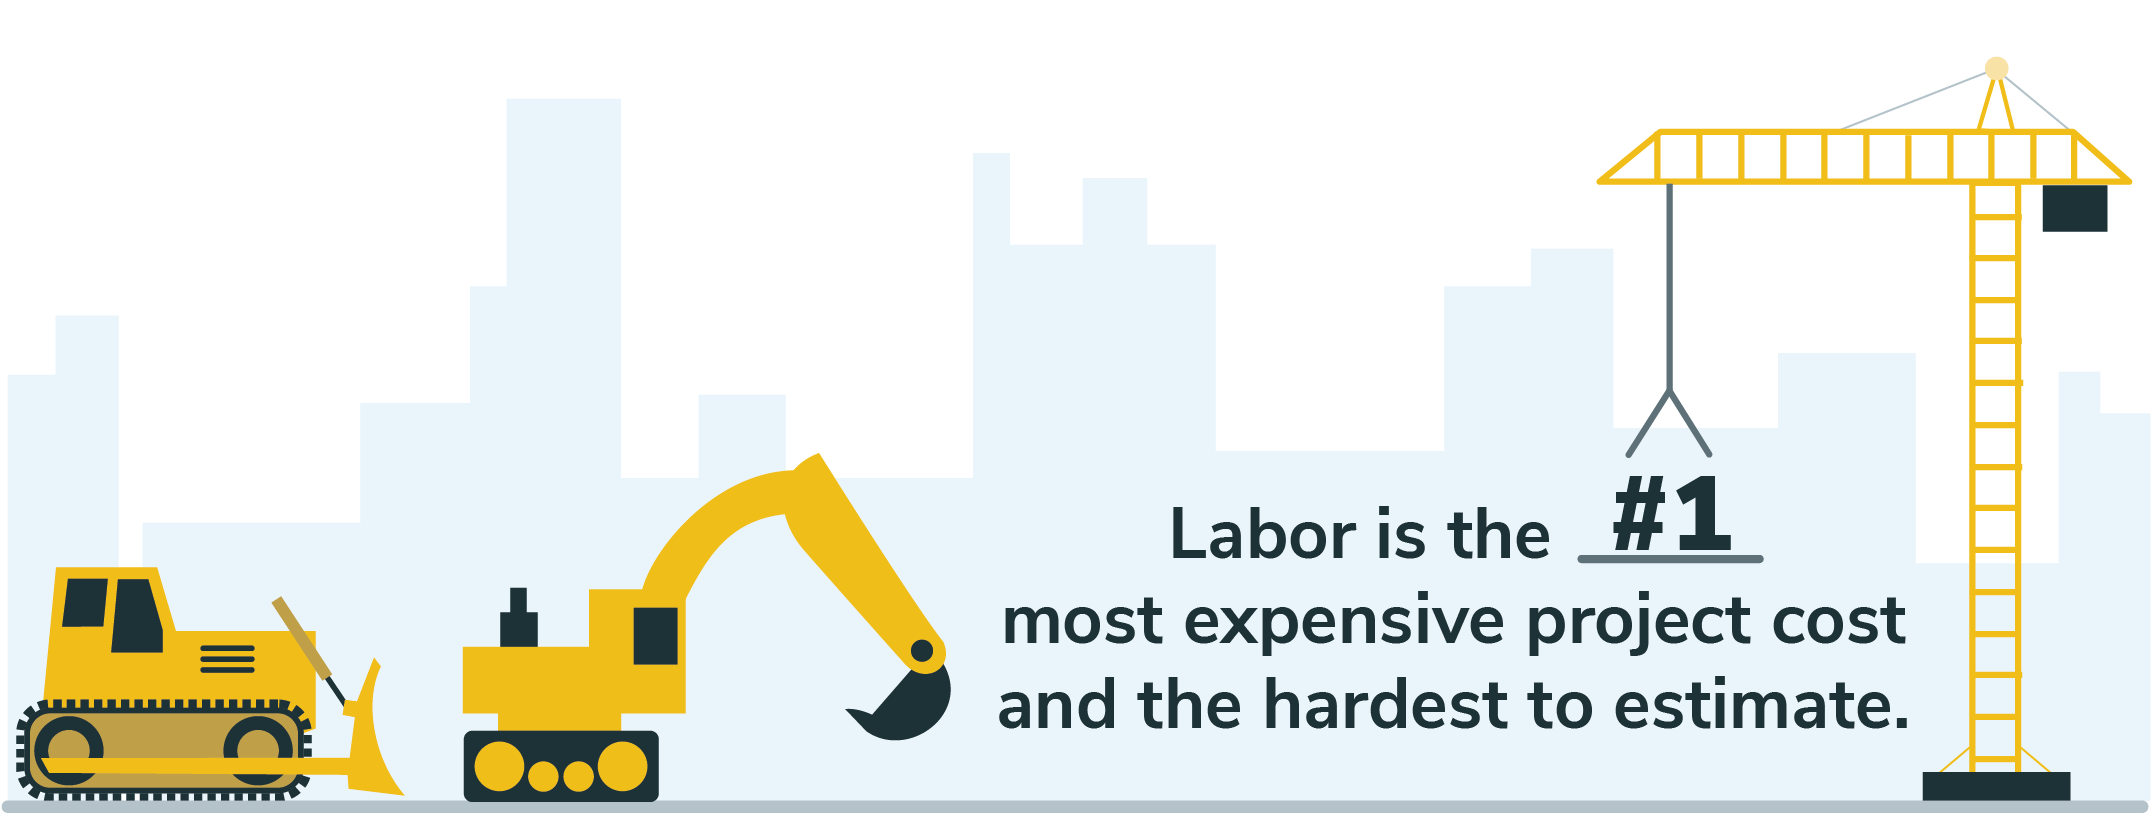 Labor is the #1 most expensive project cost and the hardest to estimate